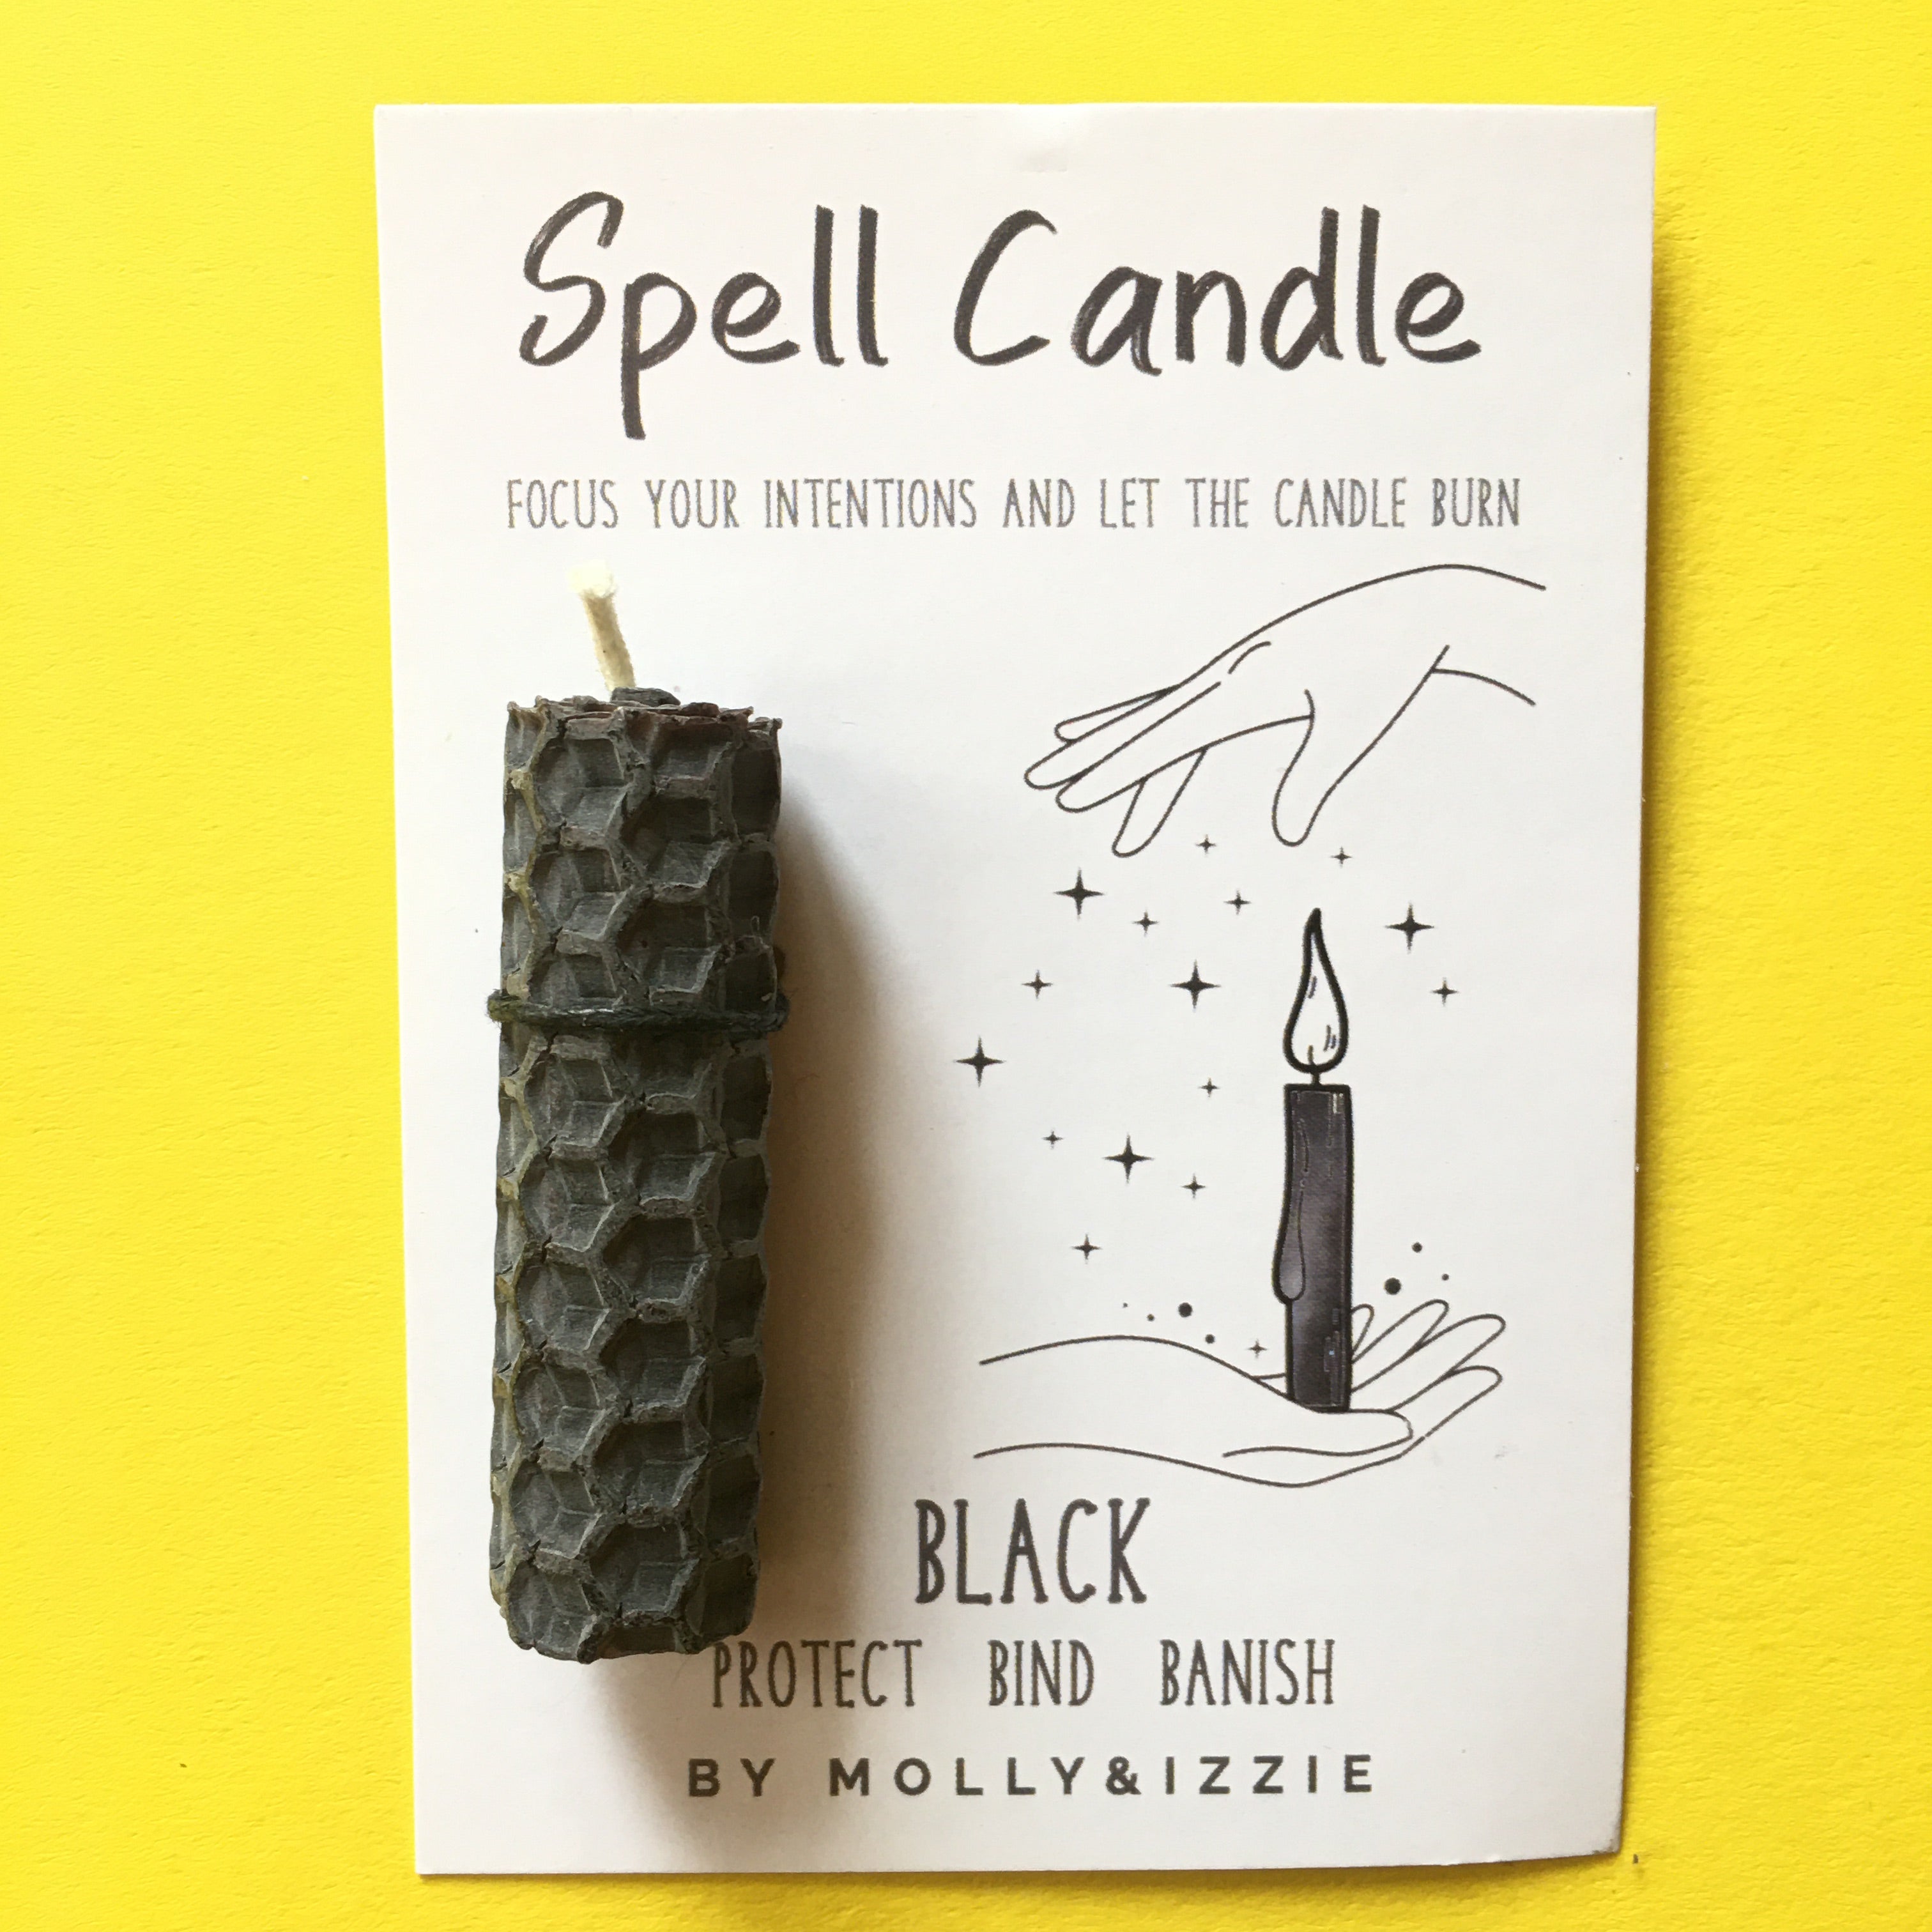 MINI BEESWAX SPELL CANDLES MOLLY & IZZIE